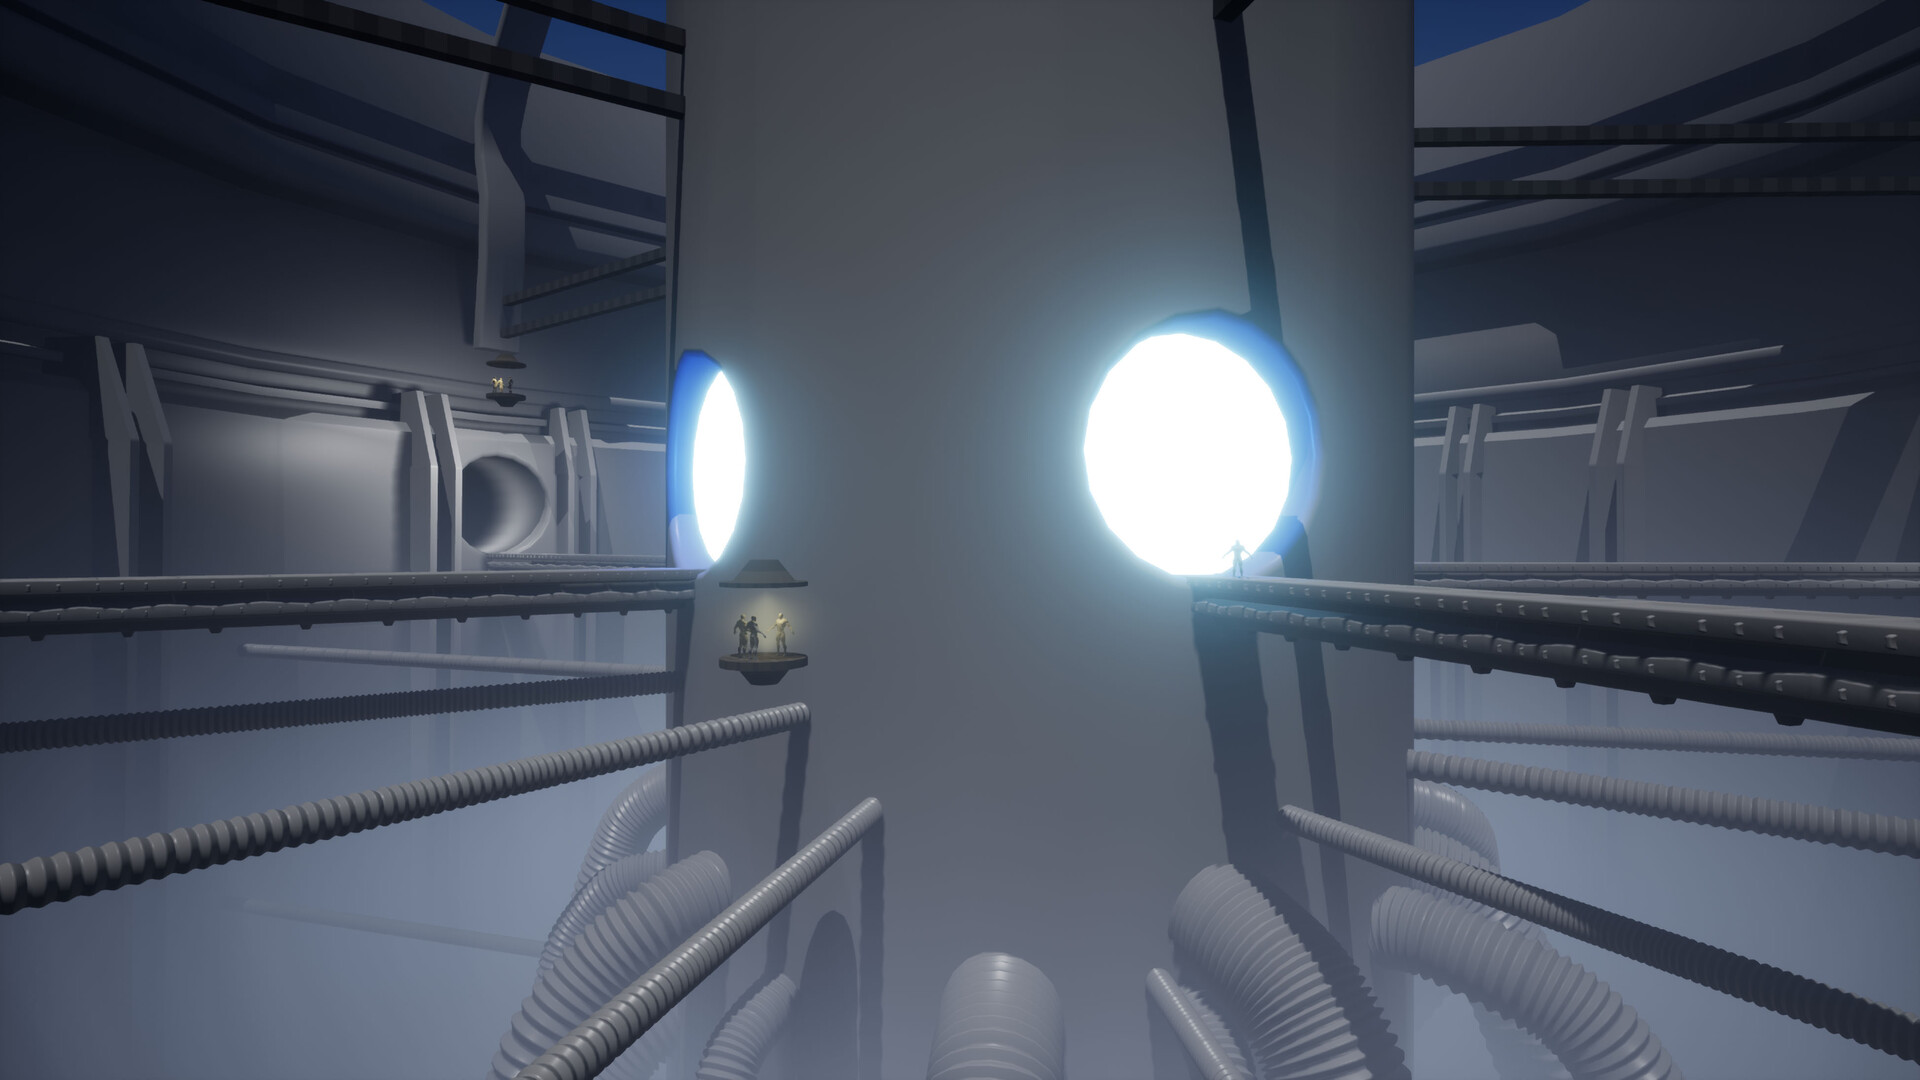 UE4 screenshot. Large, gray cylinder with gateway-like cuts. Inside the cuts are overpowering, blue emissive cards. Around are long, straight pipes and metal platforms that go outwards of the platform in all directions like chains.